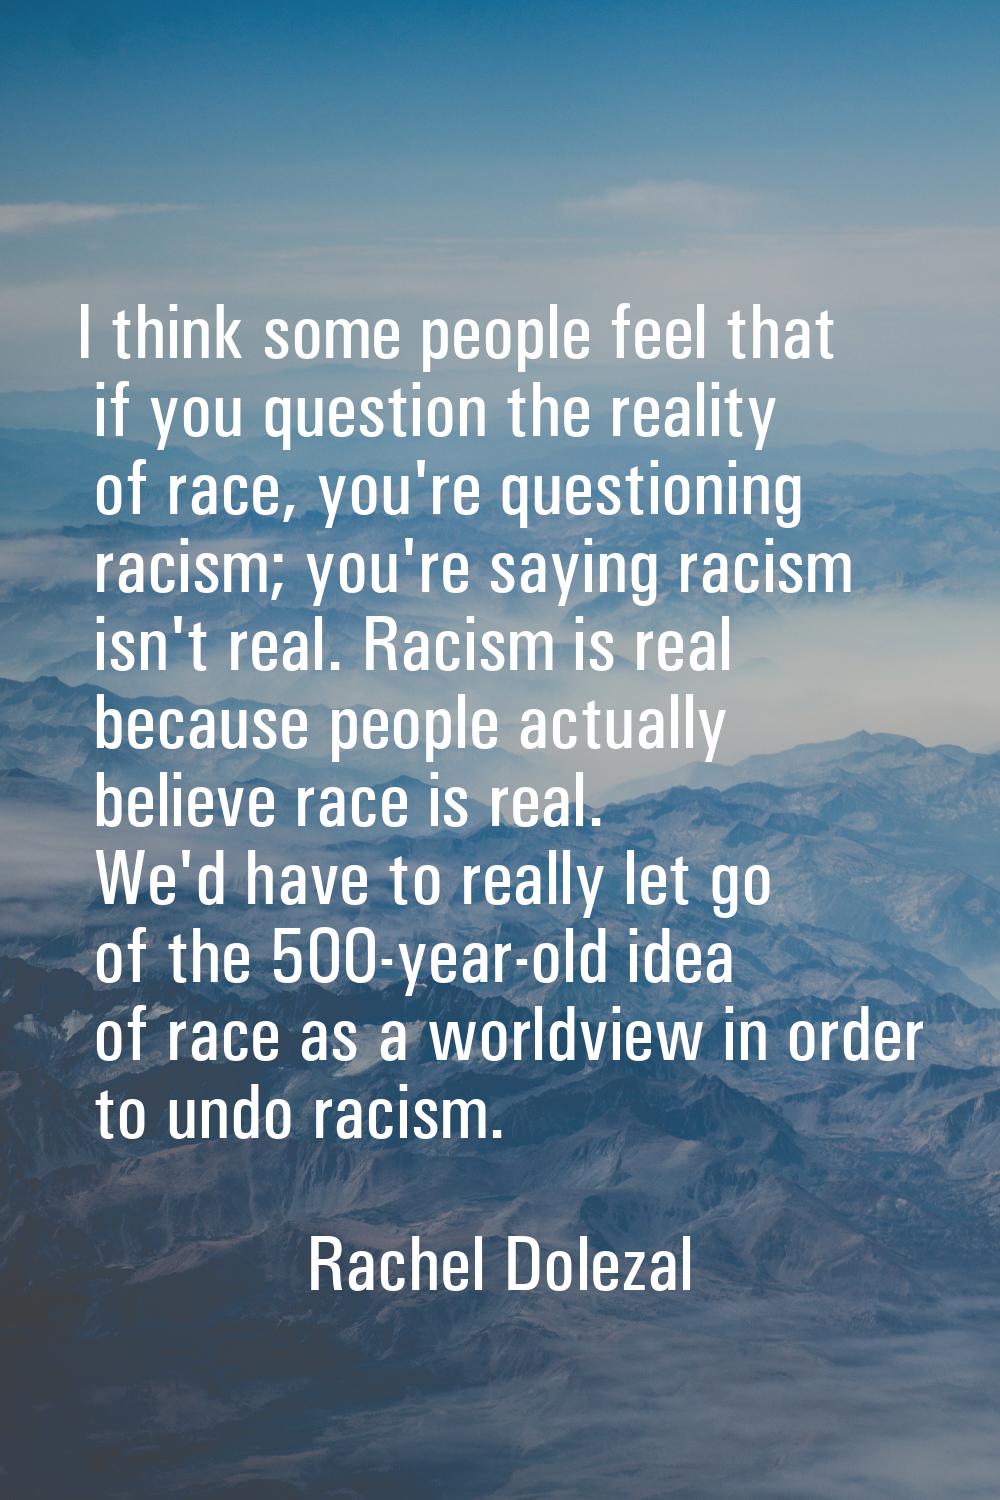 I think some people feel that if you question the reality of race, you're questioning racism; you'r